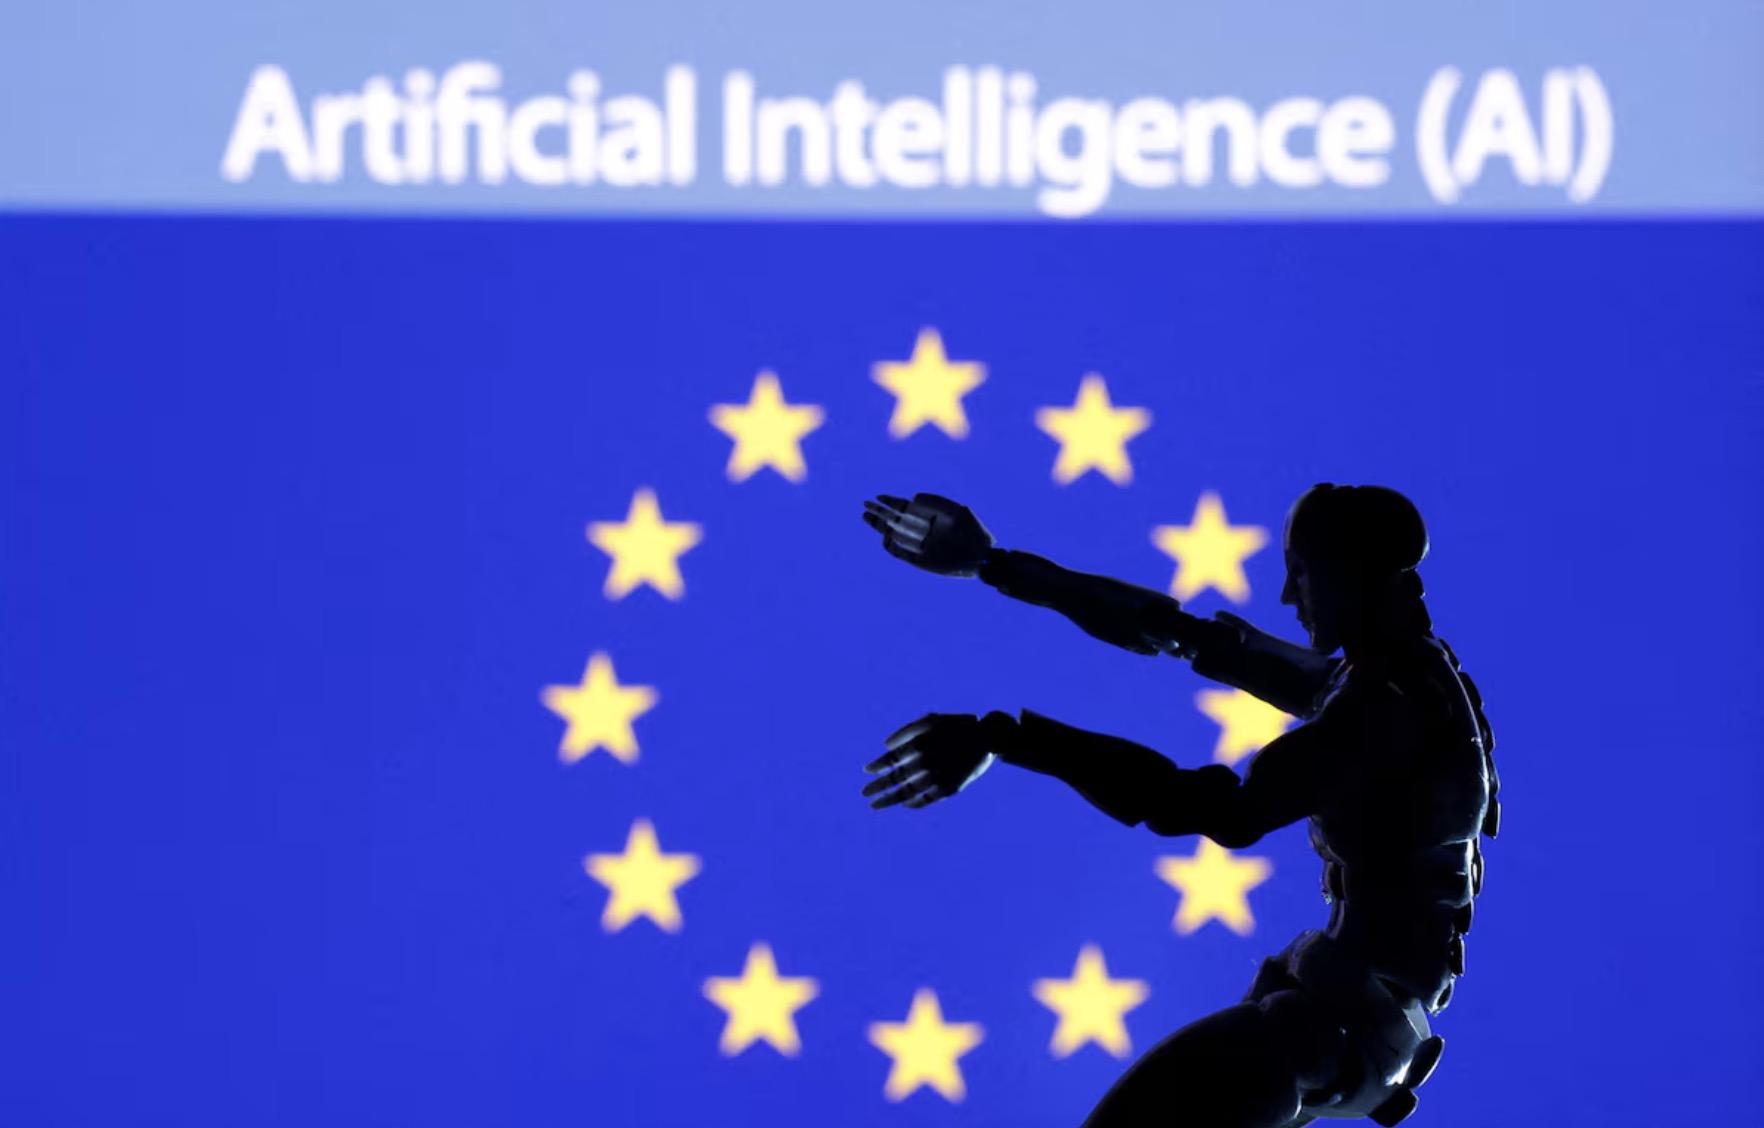 An illustration of AI artificial intelligence words, miniature of robot and EU flag. /Reuters